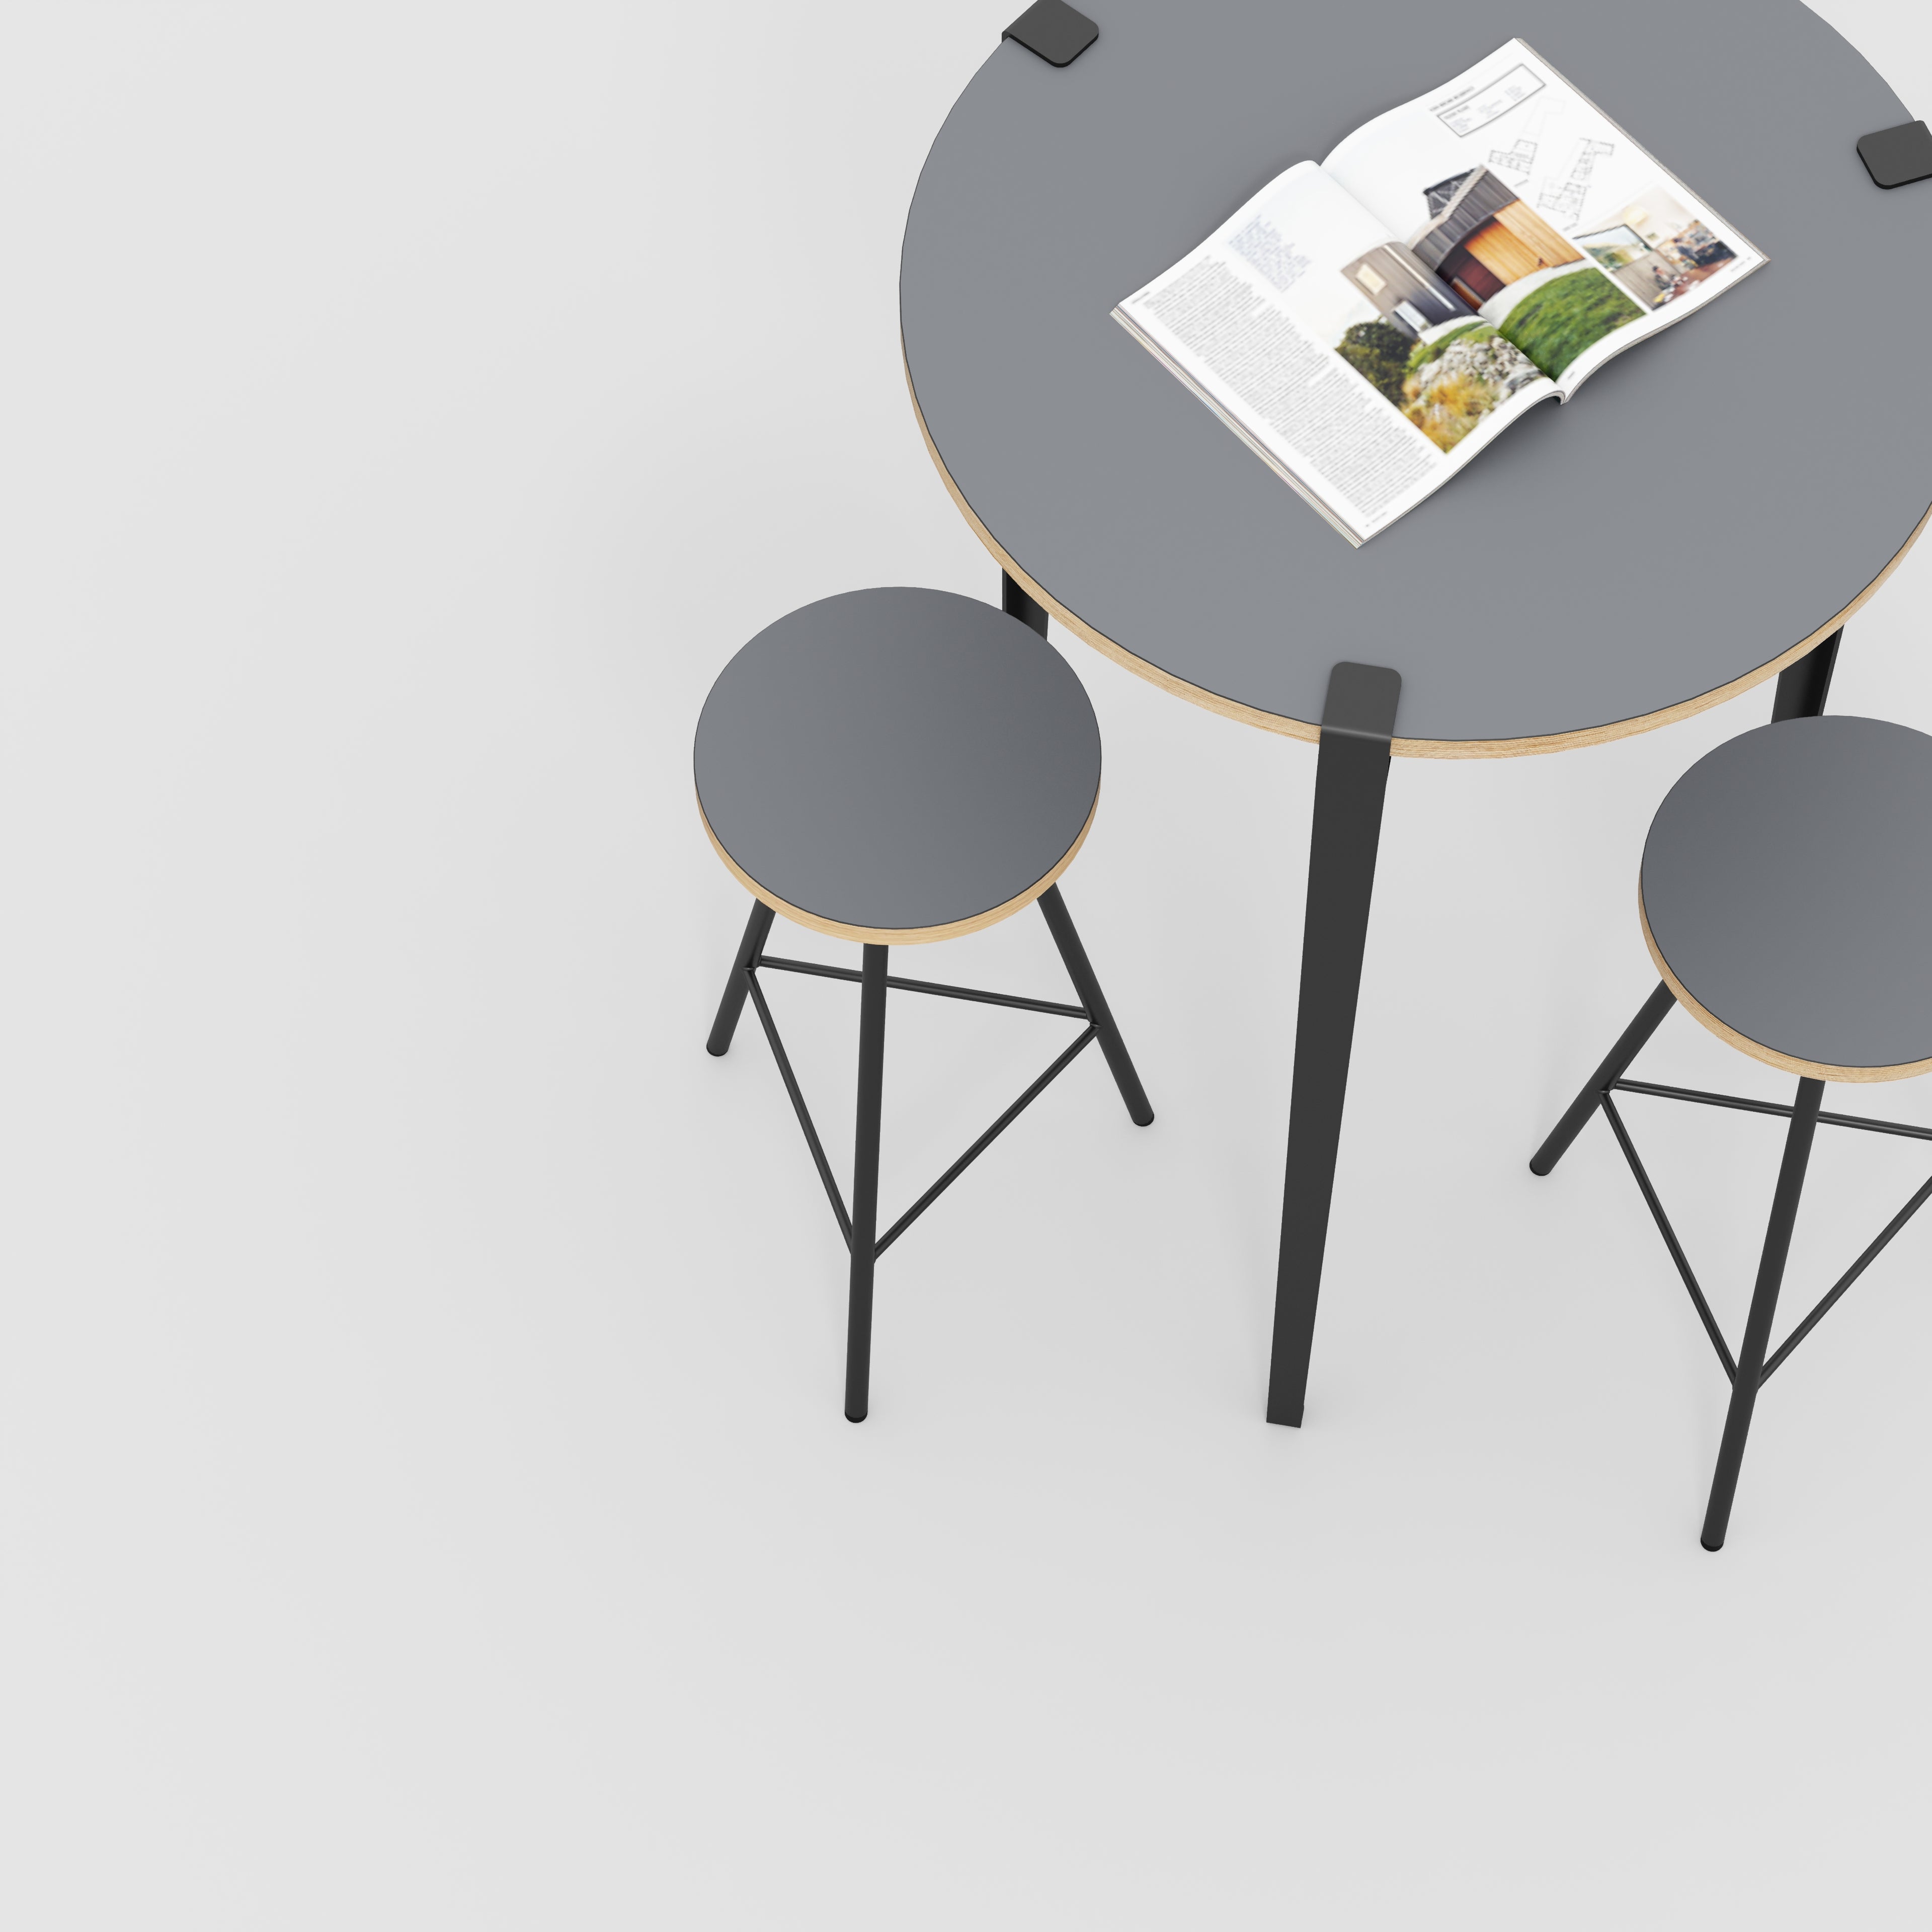 Round Table with Black Tiptoe Legs - Formica Tornado Grey - 800(dia) x 1100(h)